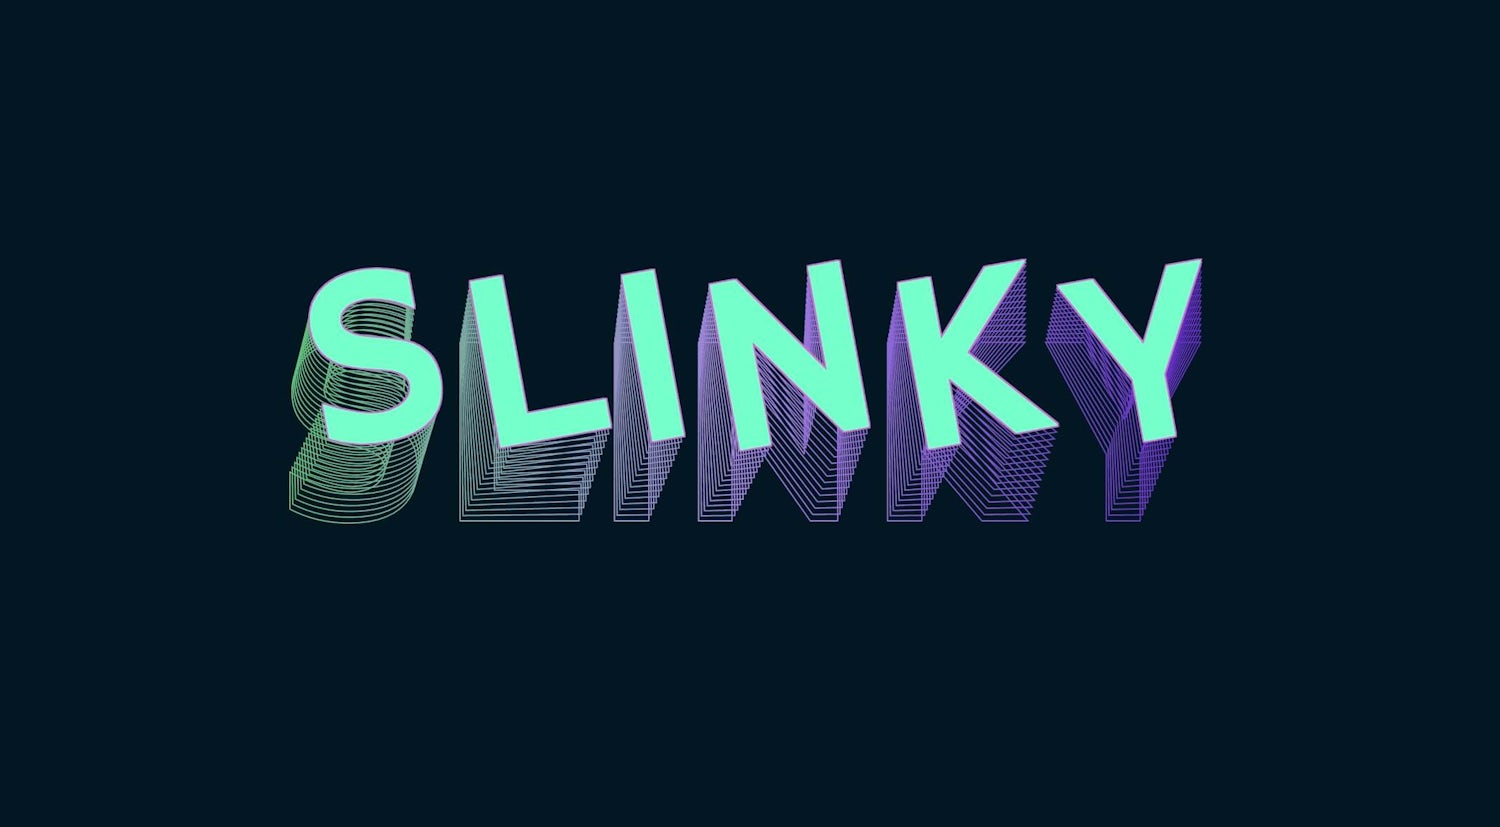 "slinky" in a very slinky variable font